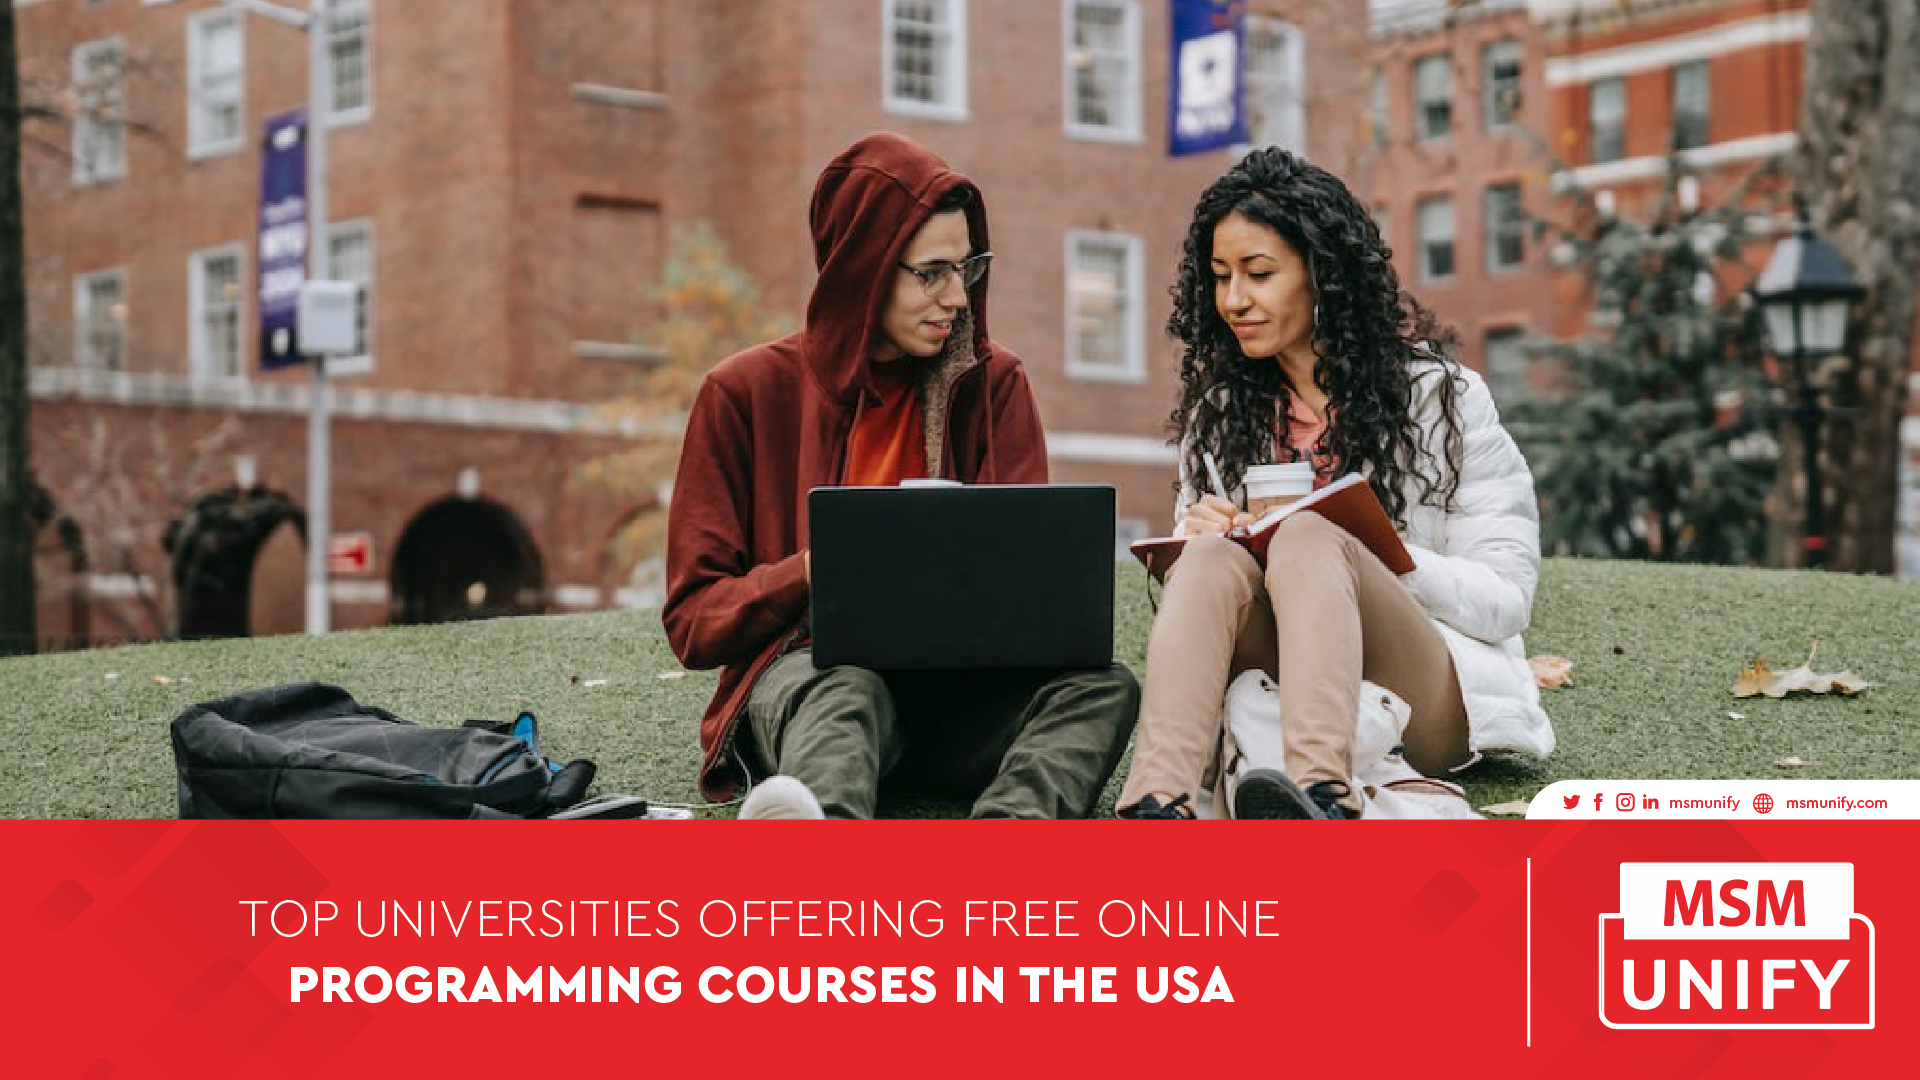 Exploring the Cost of University Education in the USA: Is It Free?